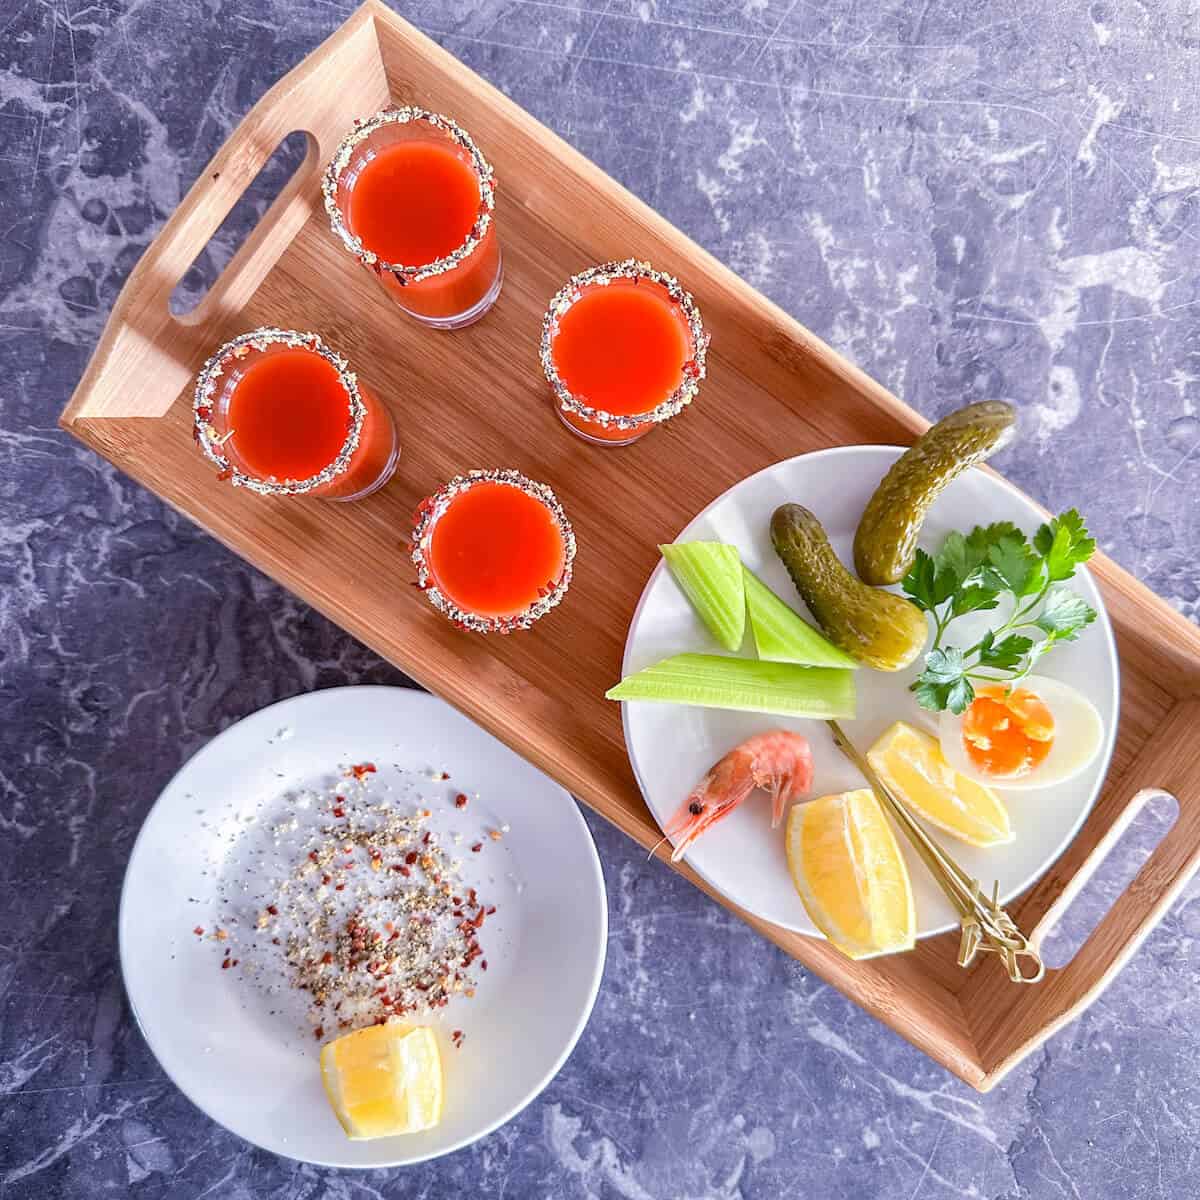 A tray of bloody mary shots next to a plate with garnishes including prawns and boiled egg.